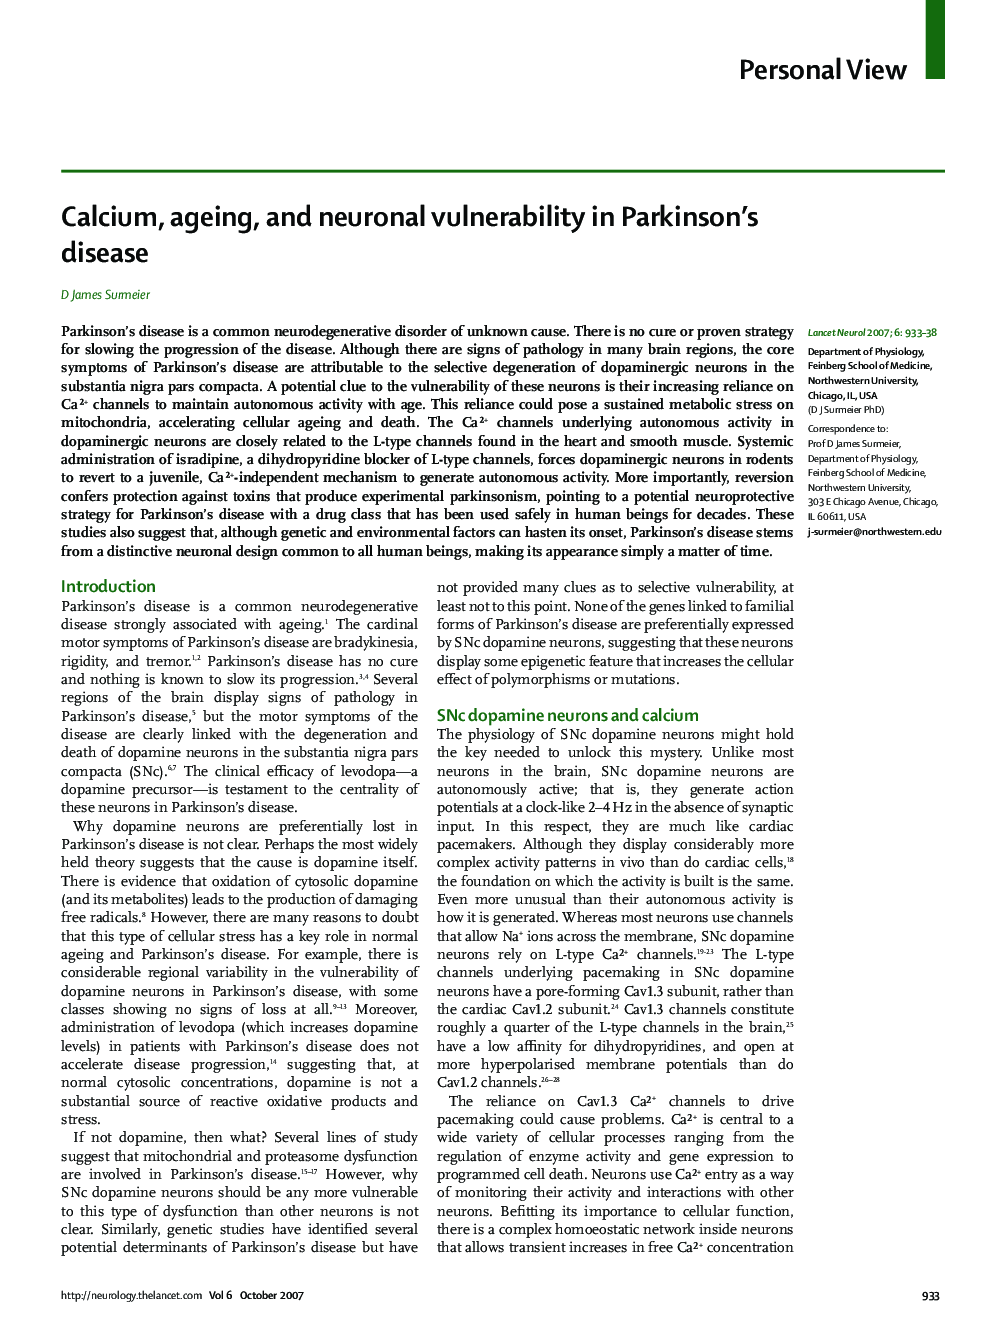 Calcium, ageing, and neuronal vulnerability in Parkinson's disease